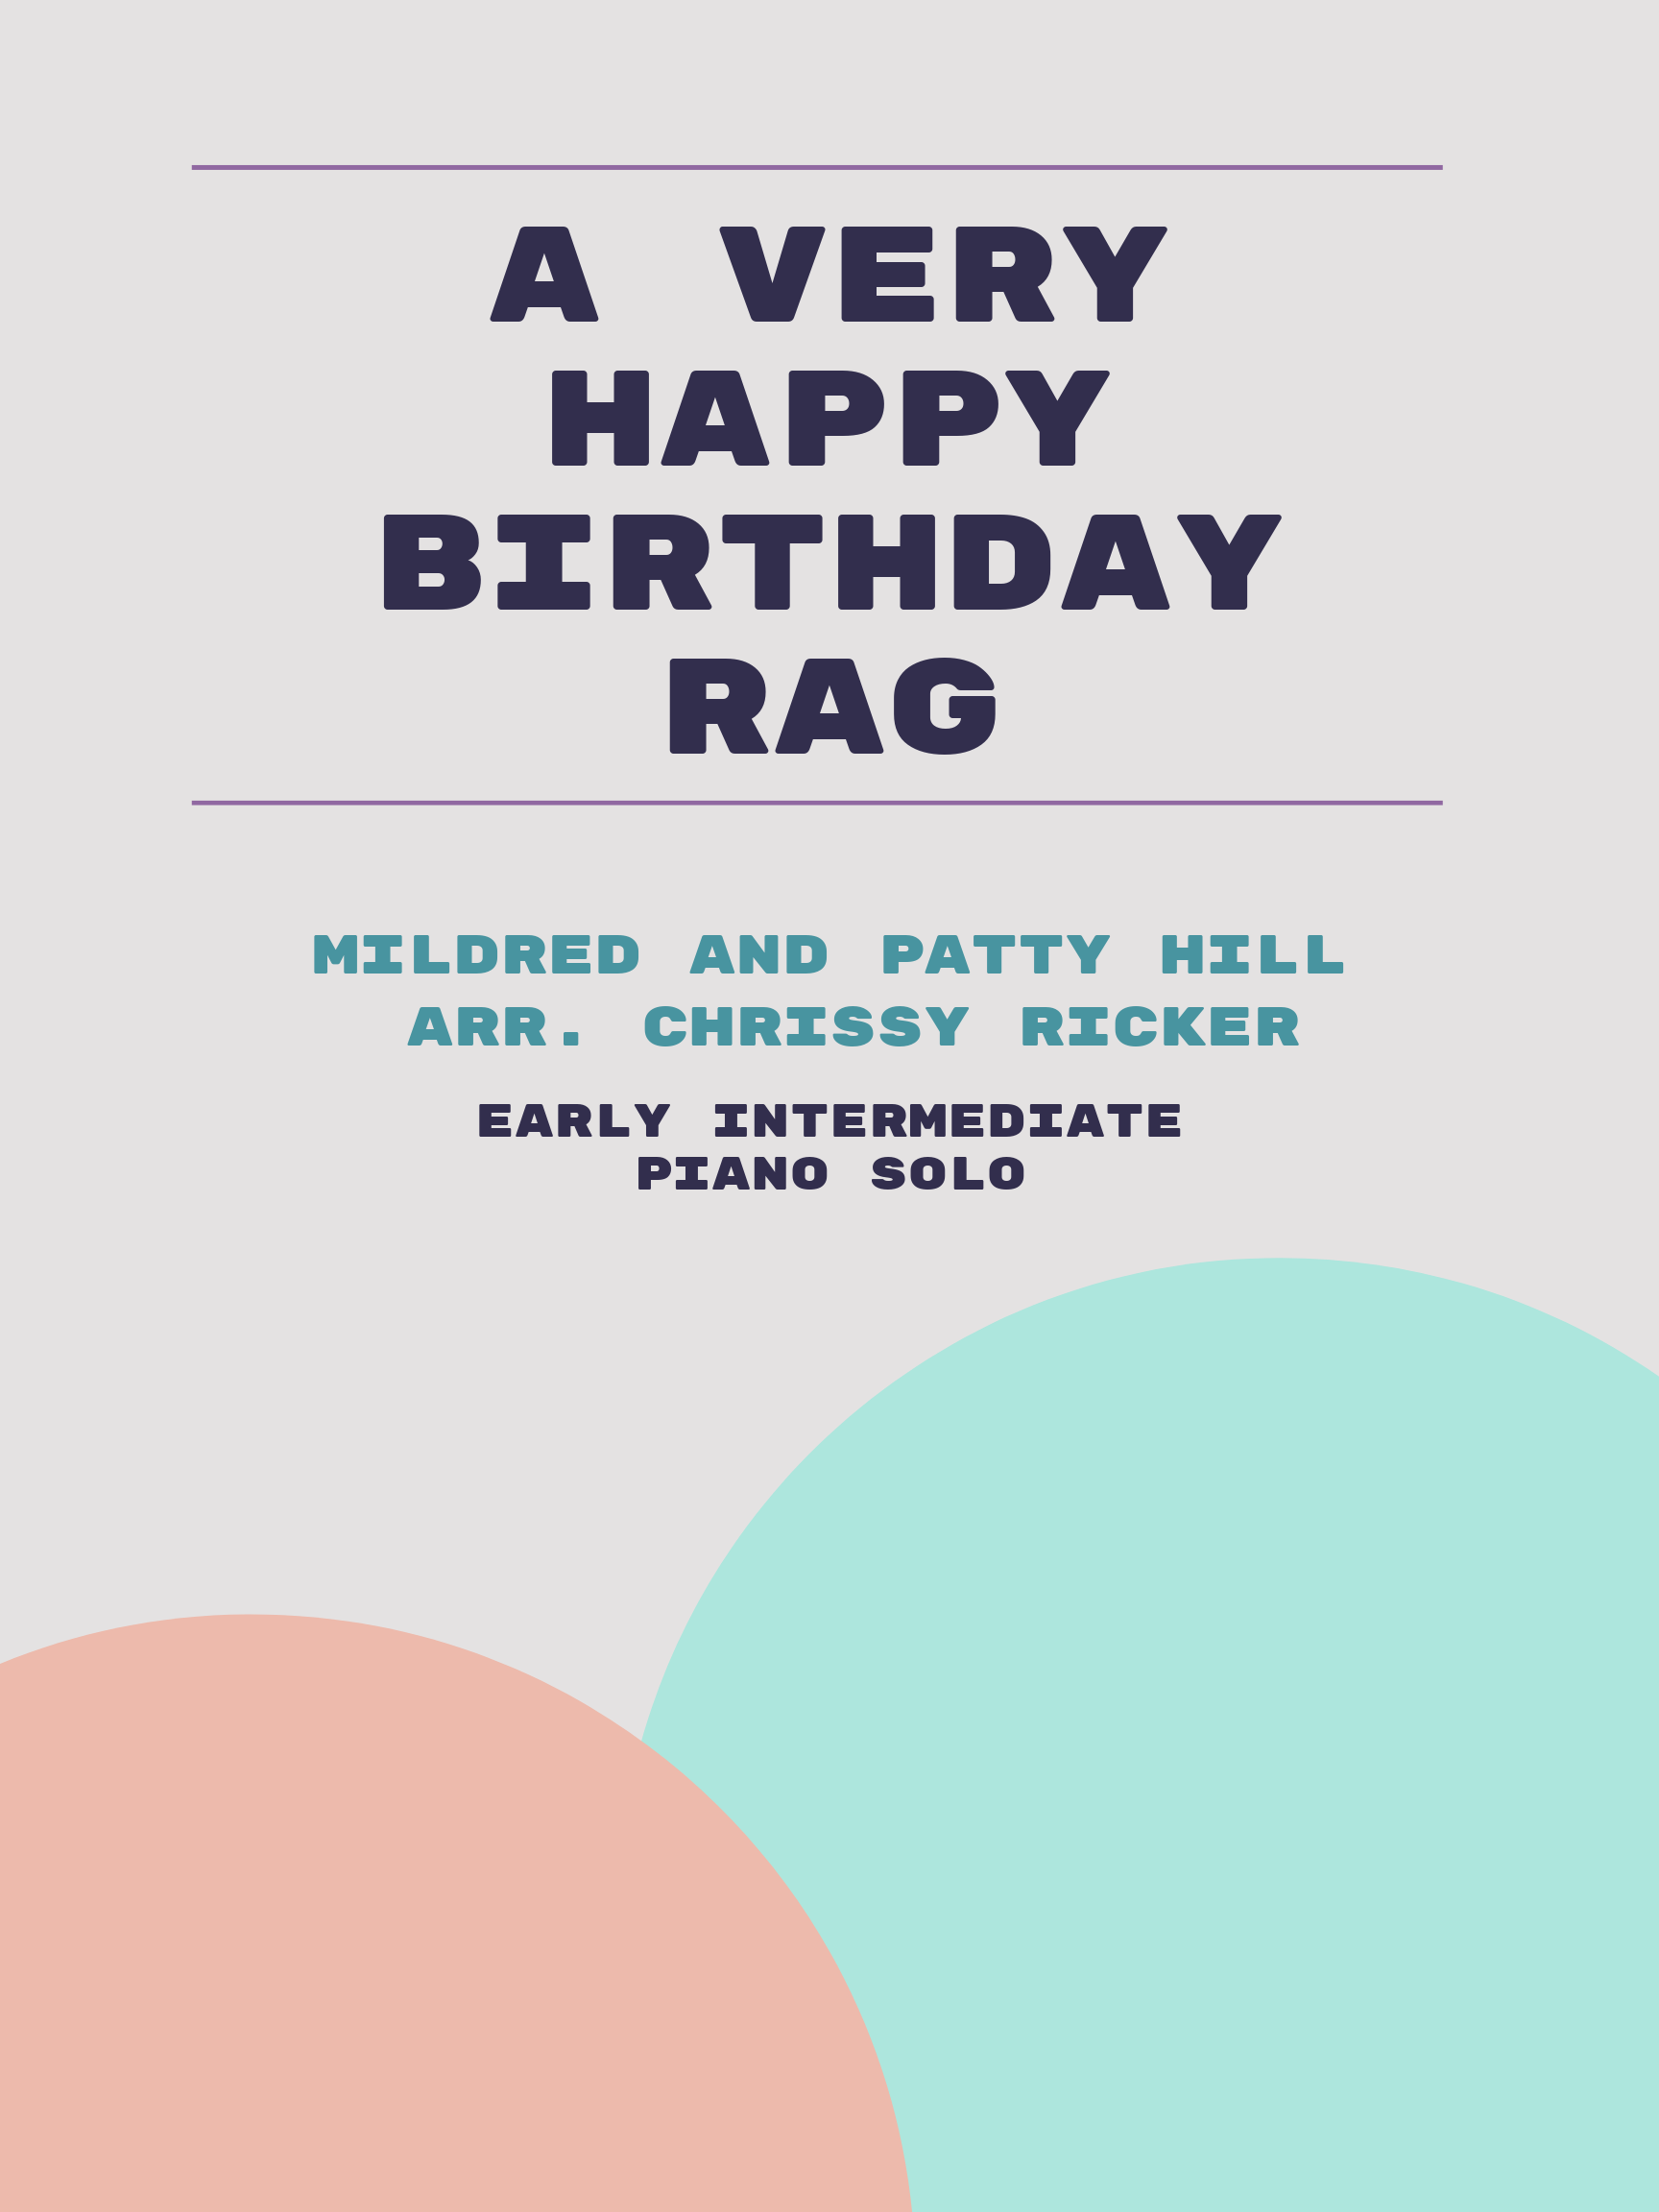 A Very Happy Birthday Rag by Mildred and Patty Hill